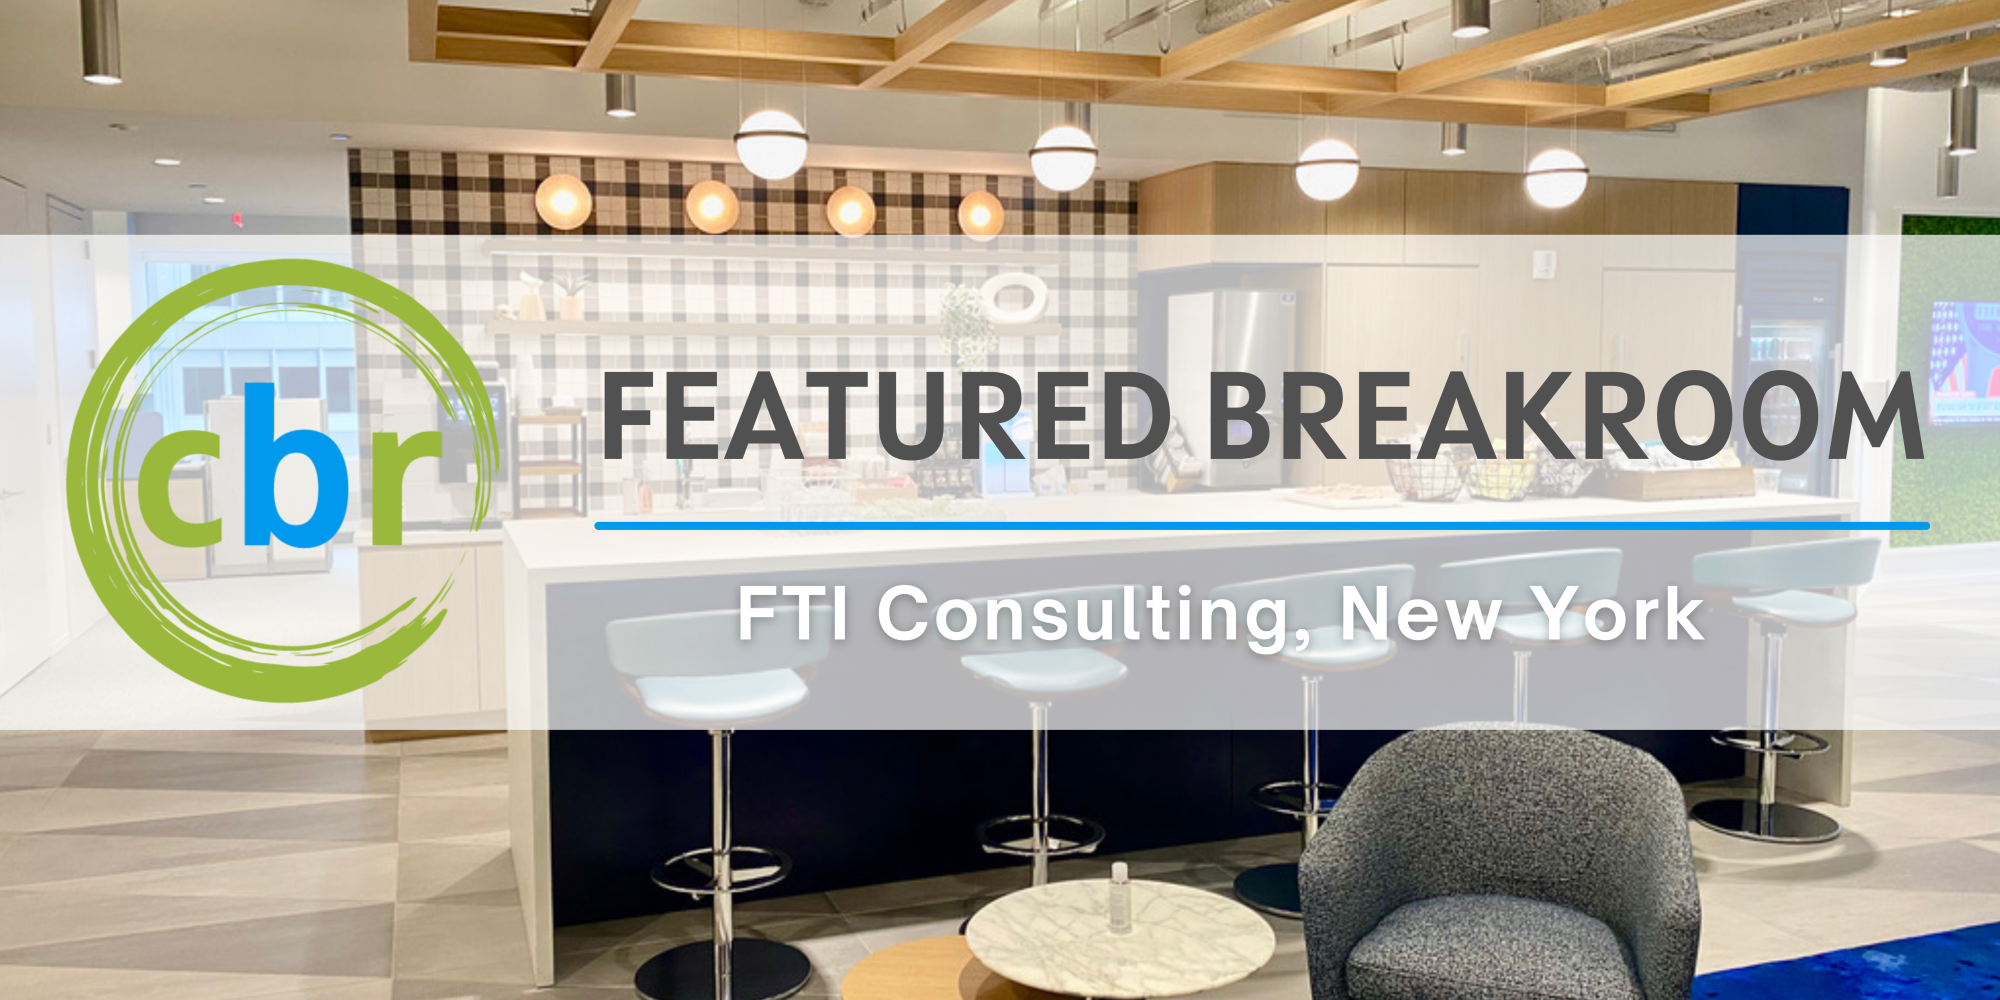 FTI Consulting | Modern Breakrooms | Coolbreakrooms